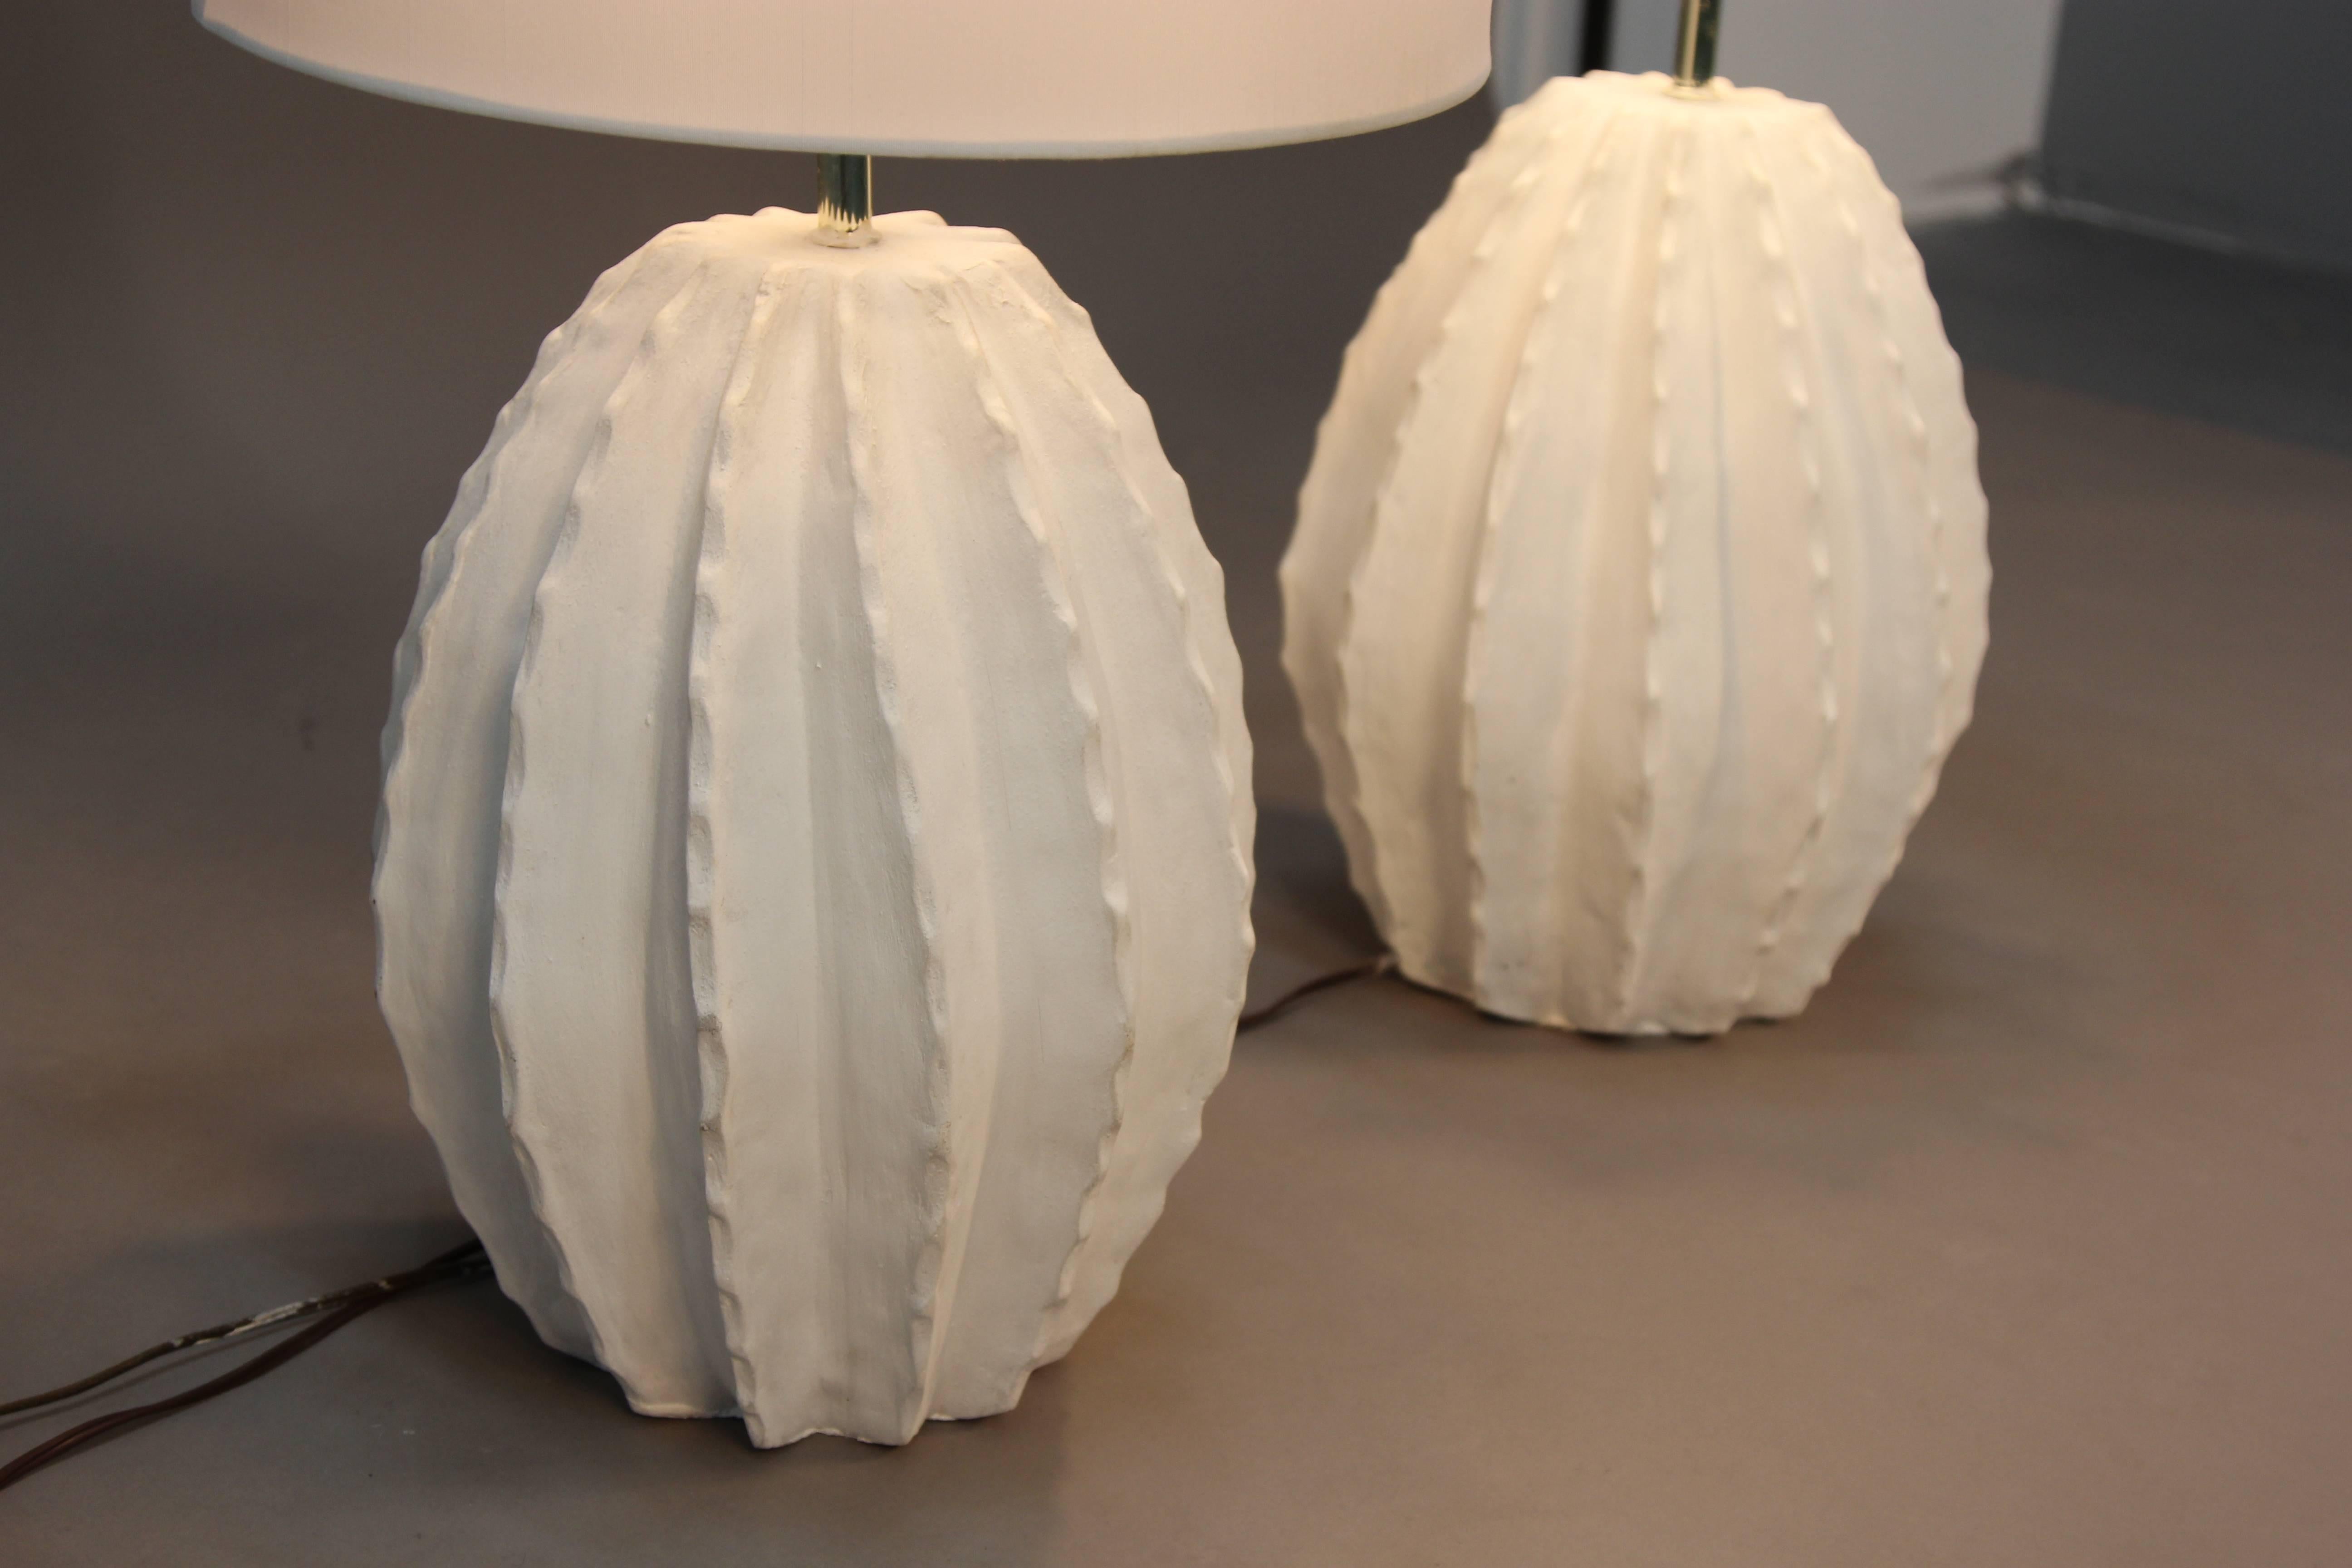 White ceramic cactus shaped table lamps with white lamp shades. Cool and unique vintage style.